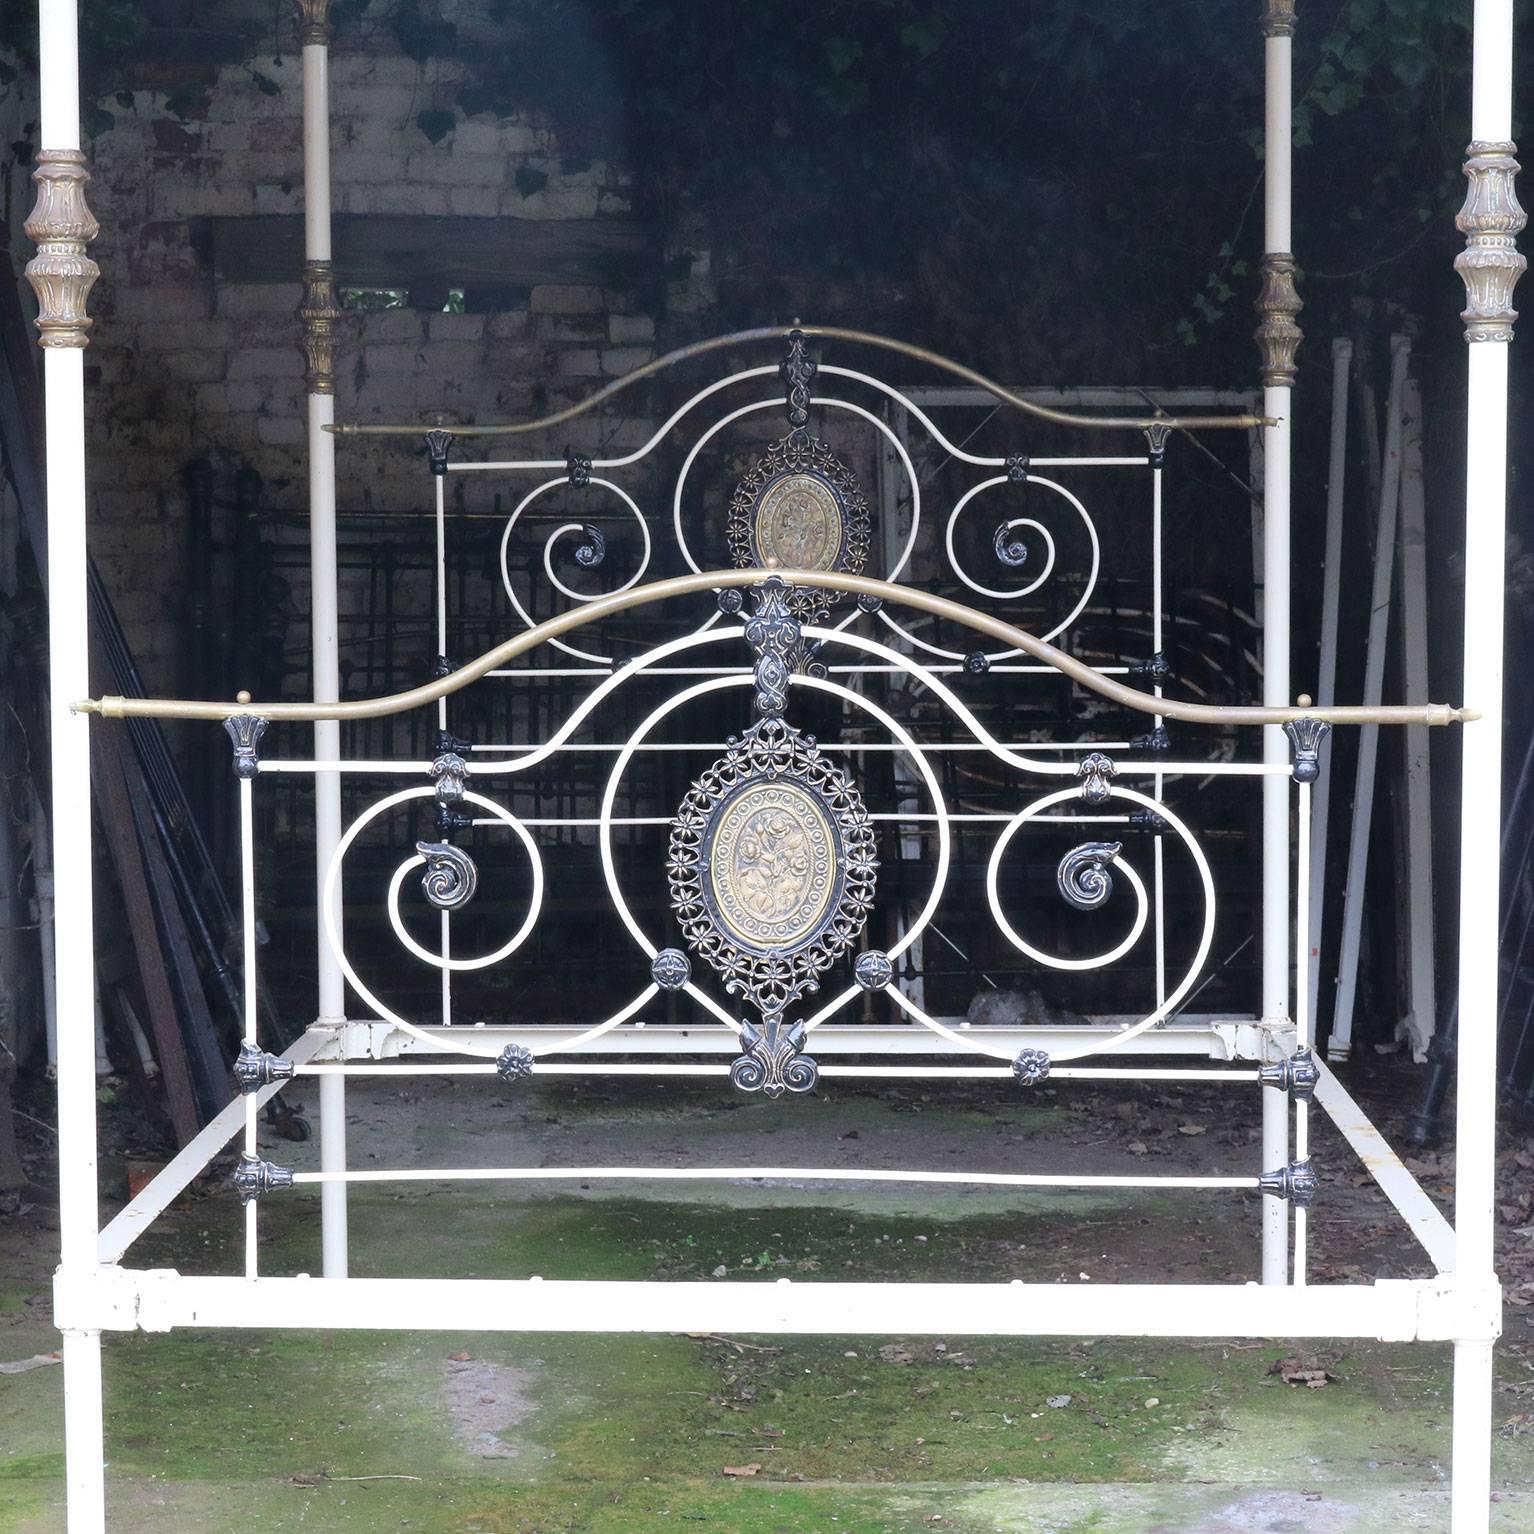 A cast iron and brass four-poster bed from the mid-Victorian era with Fine cast iron work and central brass plaques, serpentine brass top rails and decorative brass fittings.

This bed has been hand-painted white over black metal with the castings